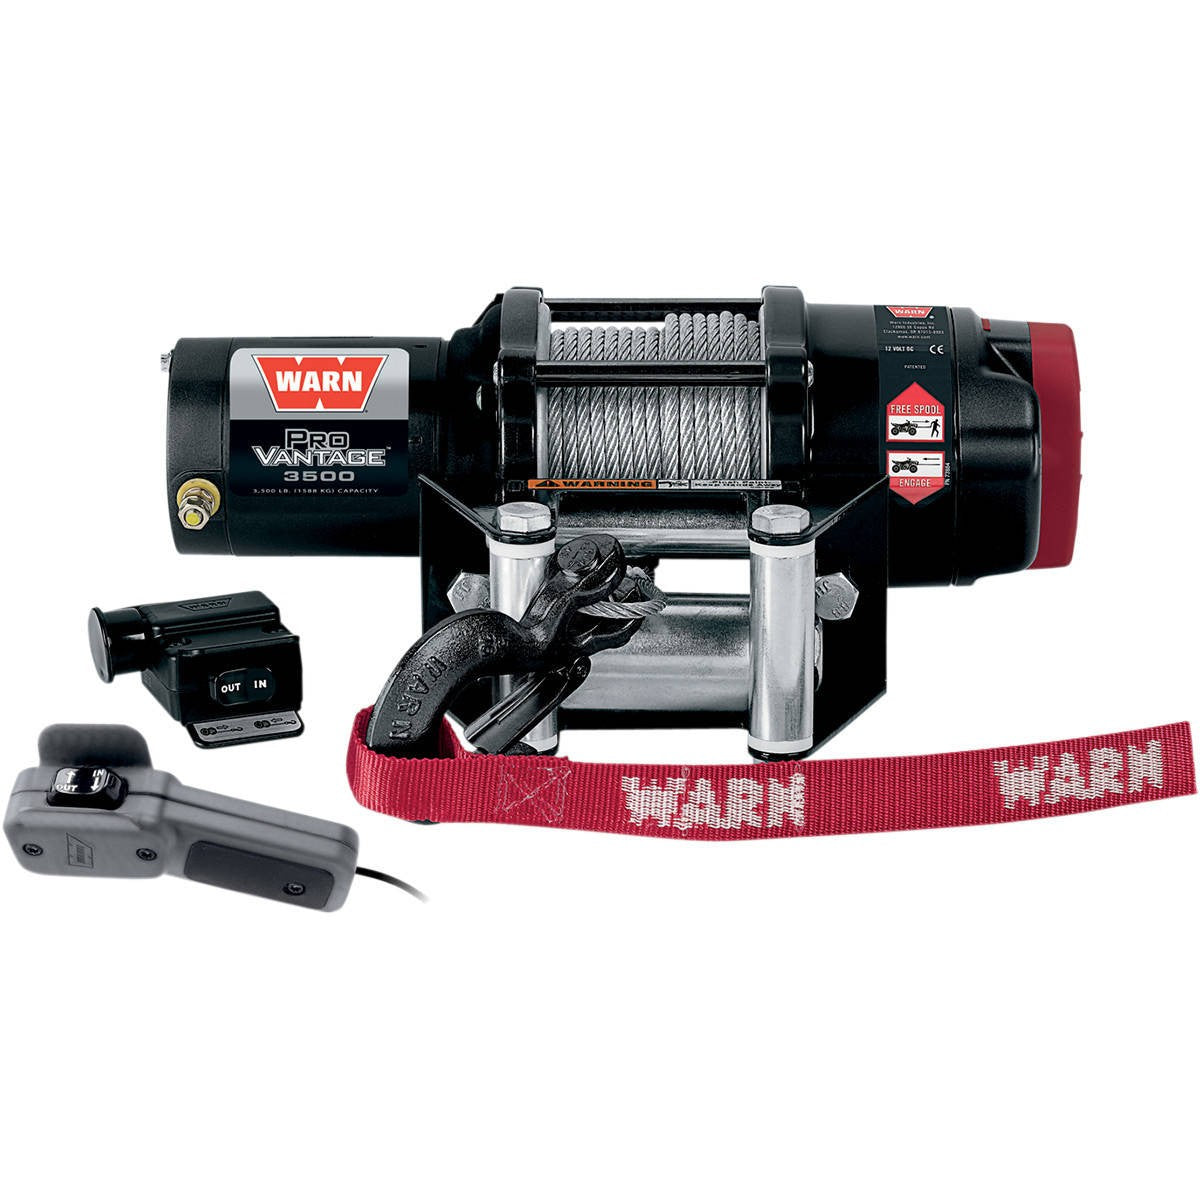 Warn Provantage 3500-lb Winch with Wire Rope - PeakBoys